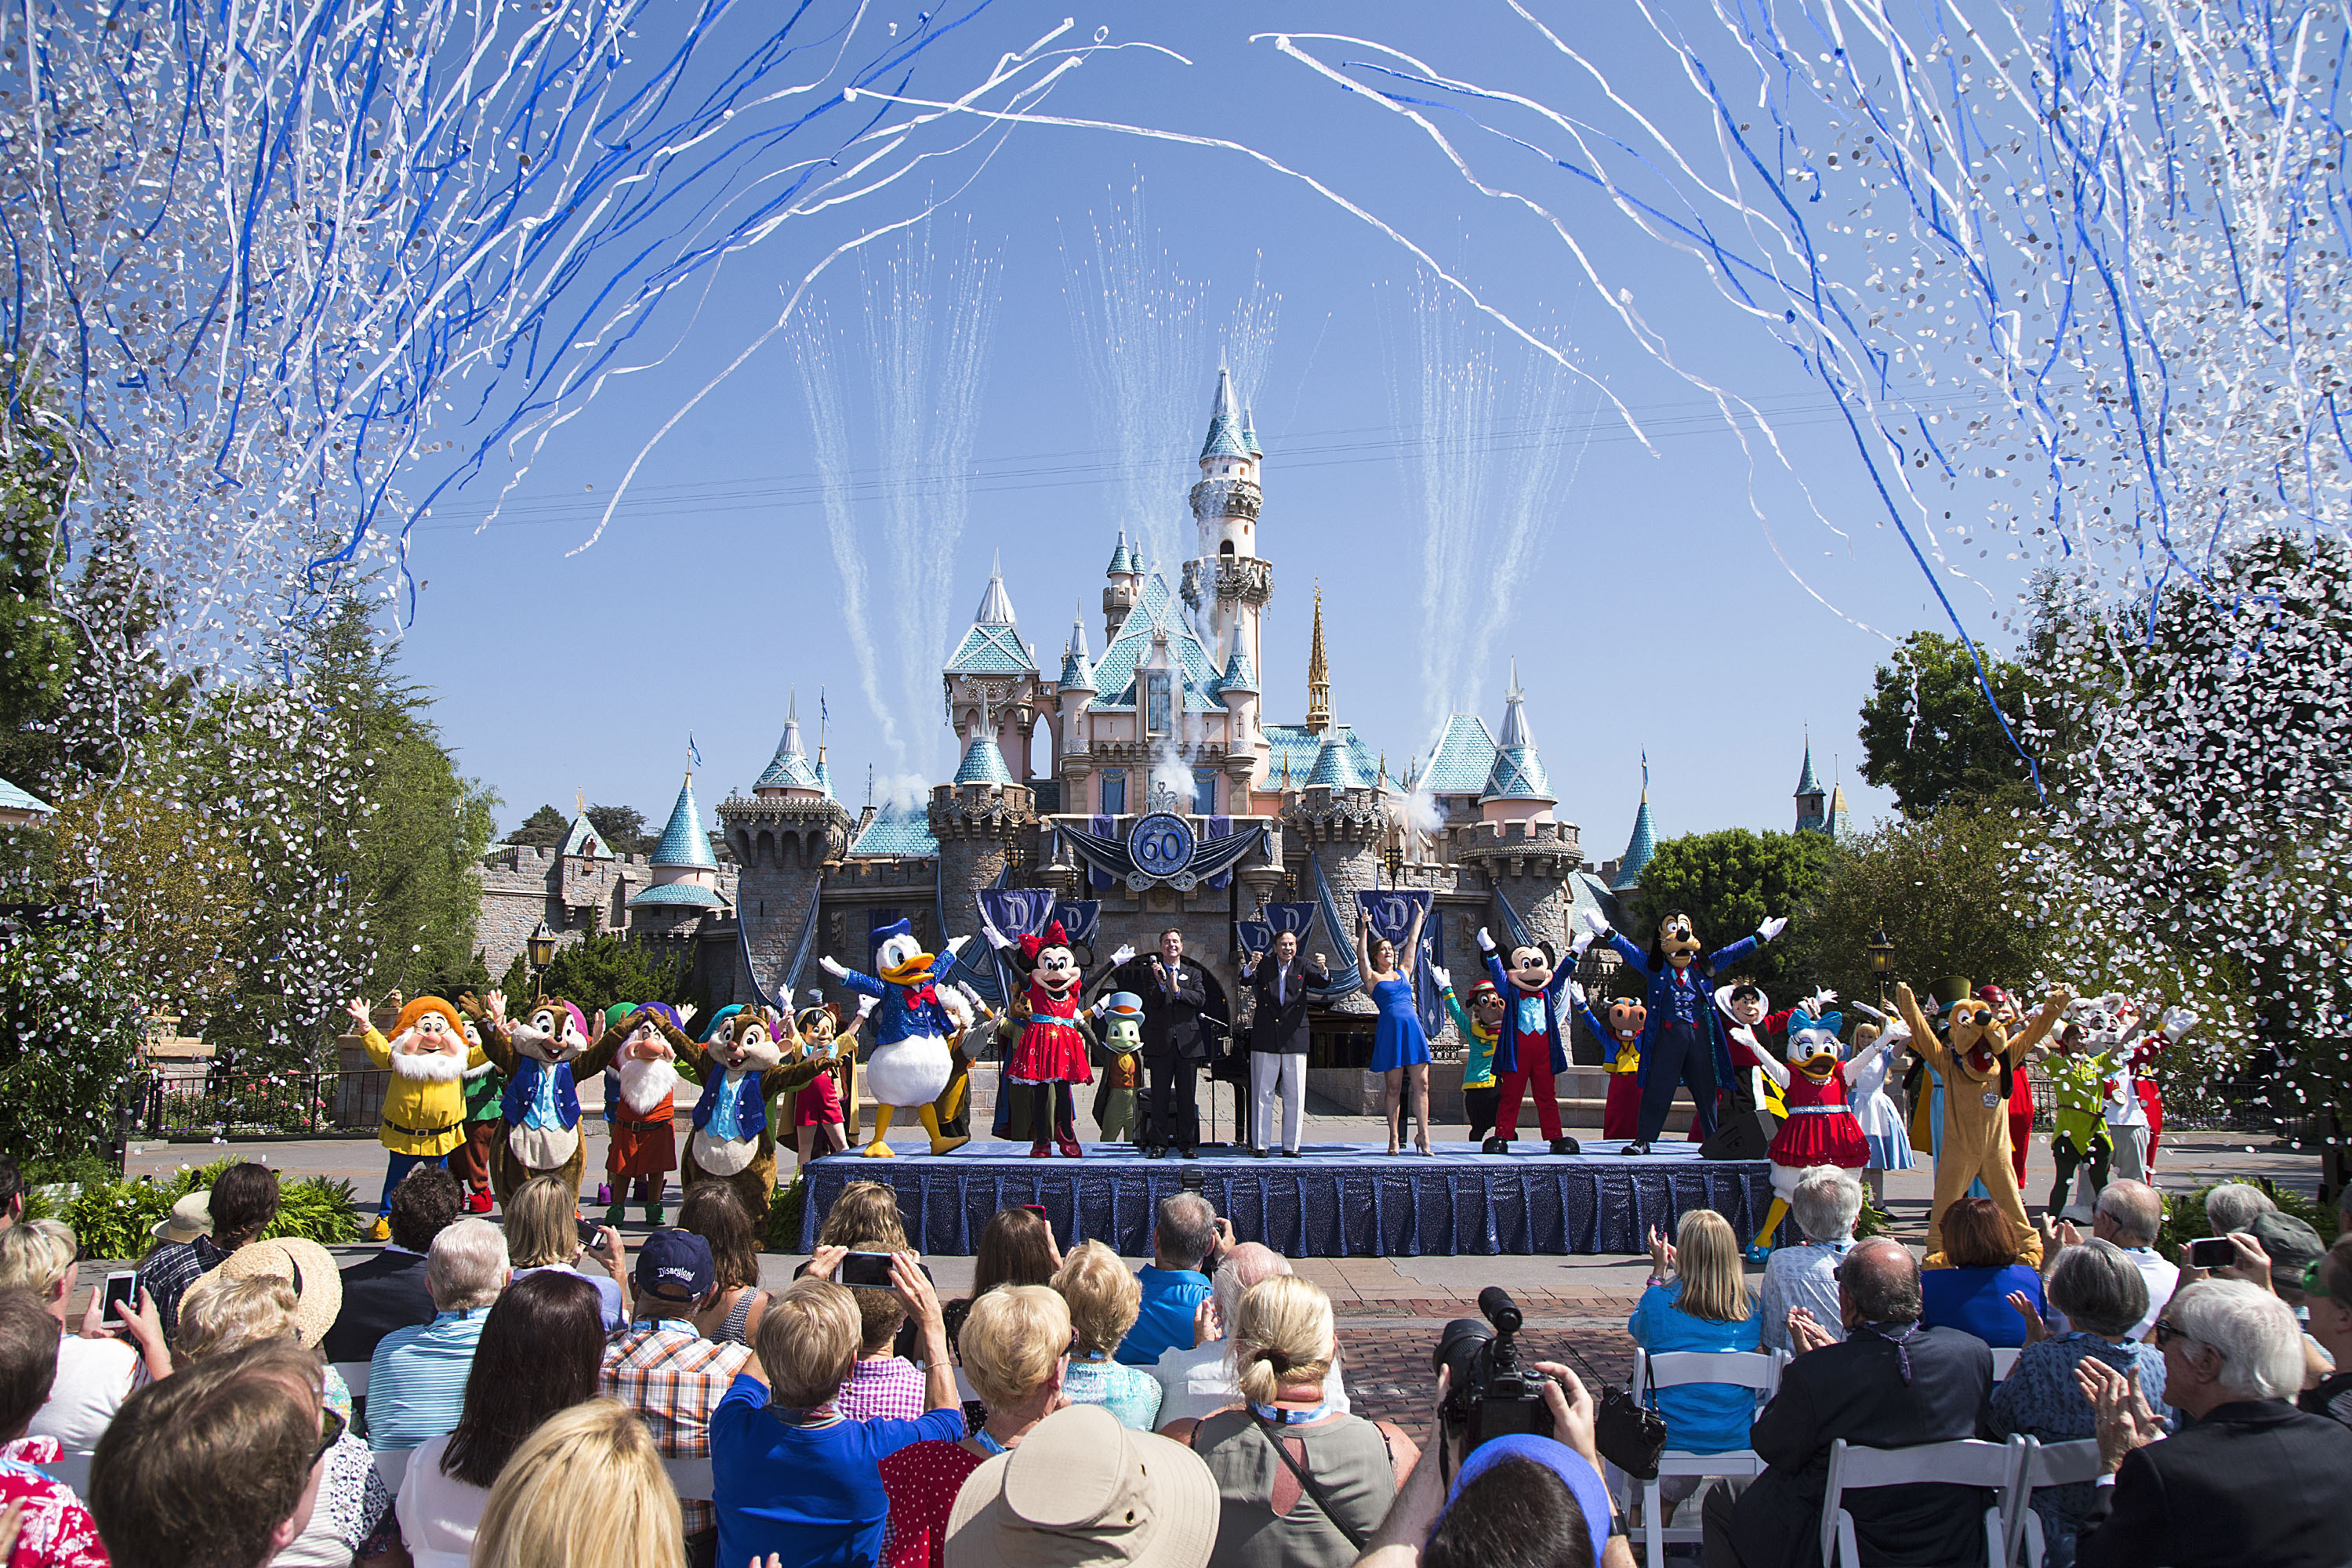 Mickey Mouse and his friends celebrate the 60th anniversary of Disneyland park during a ceremony at Sleeping Beauty Castle in Anaheim, Calif. on Friday, July 17 (Handout—©2015 Disney Enterprises, Inc.)